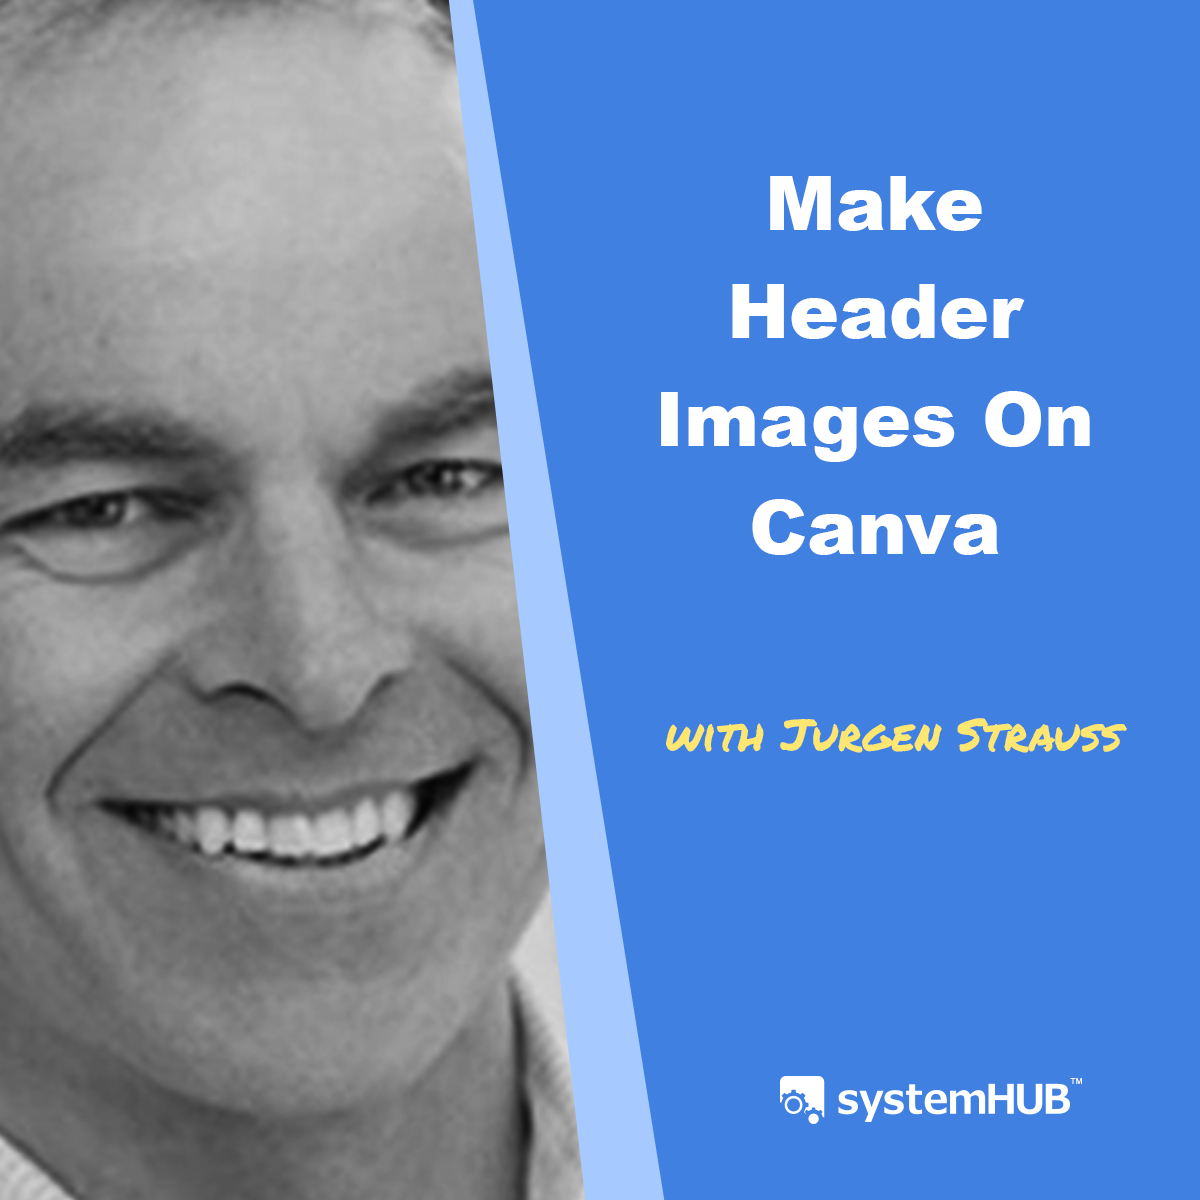 Making Header Images on Canva with Jurgen Strauss